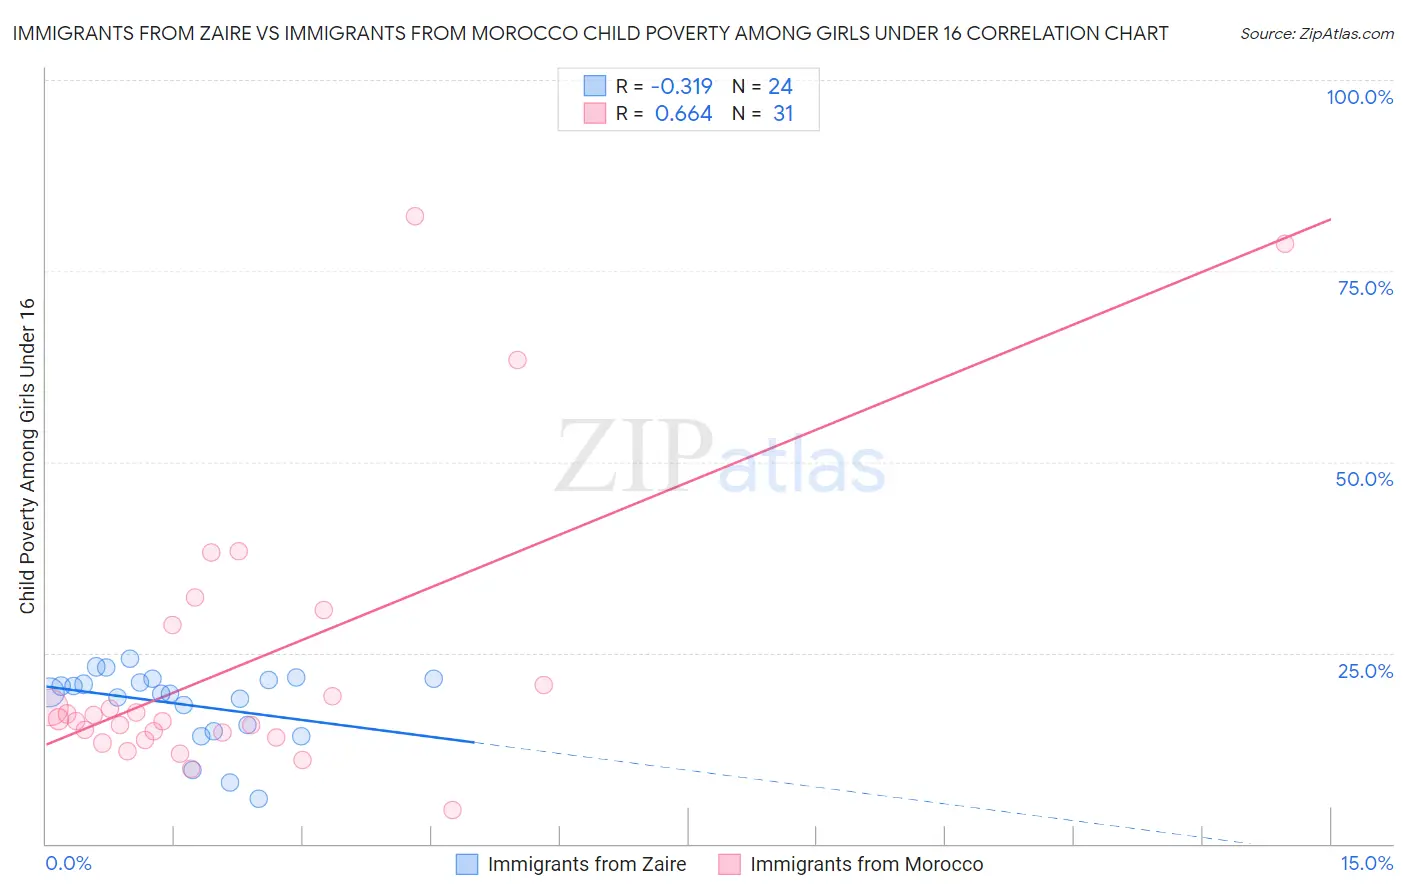 Immigrants from Zaire vs Immigrants from Morocco Child Poverty Among Girls Under 16